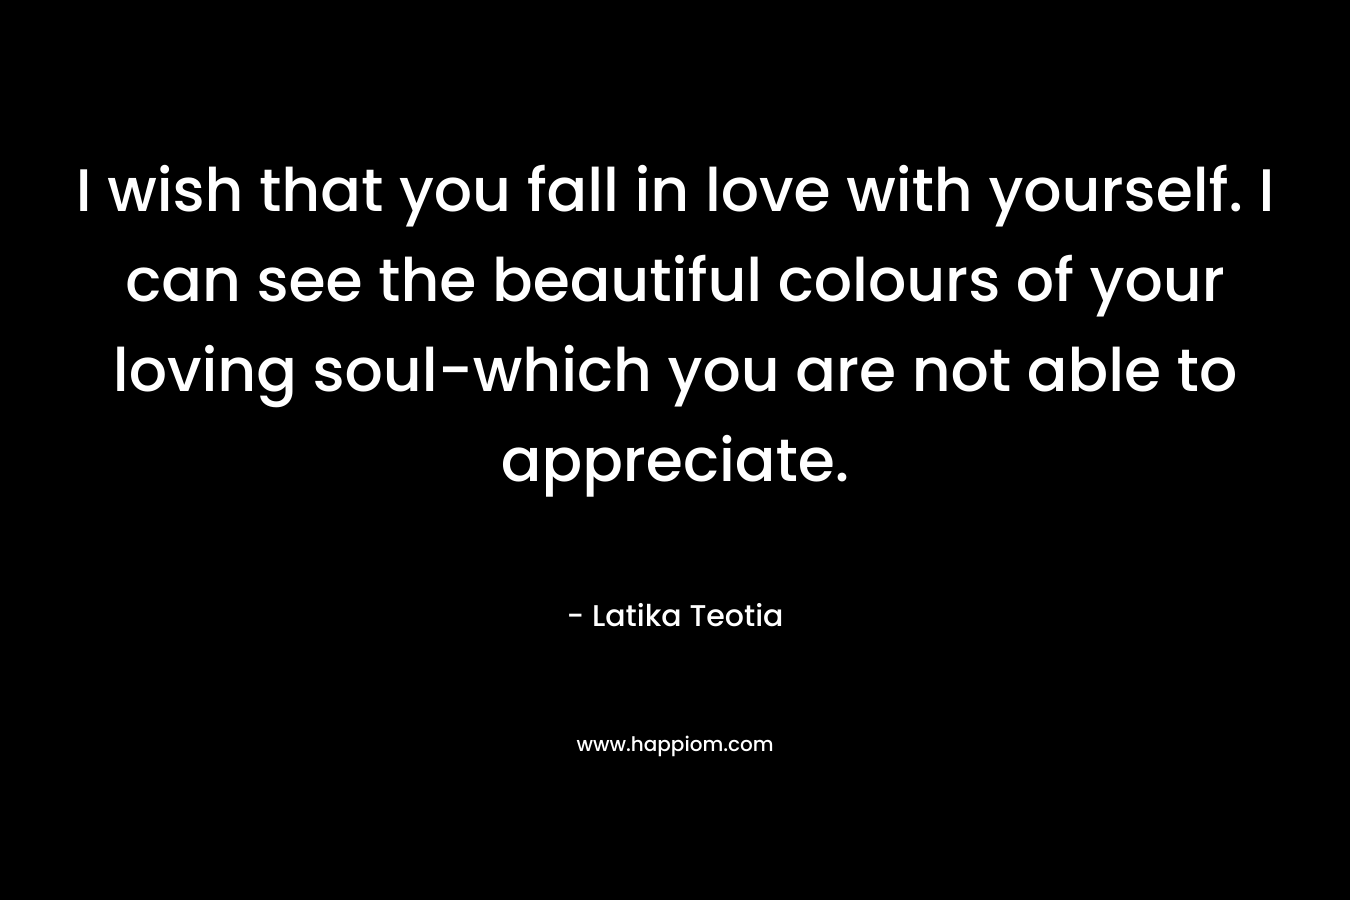 I wish that you fall in love with yourself. I can see the beautiful colours of your loving soul-which you are not able to appreciate.